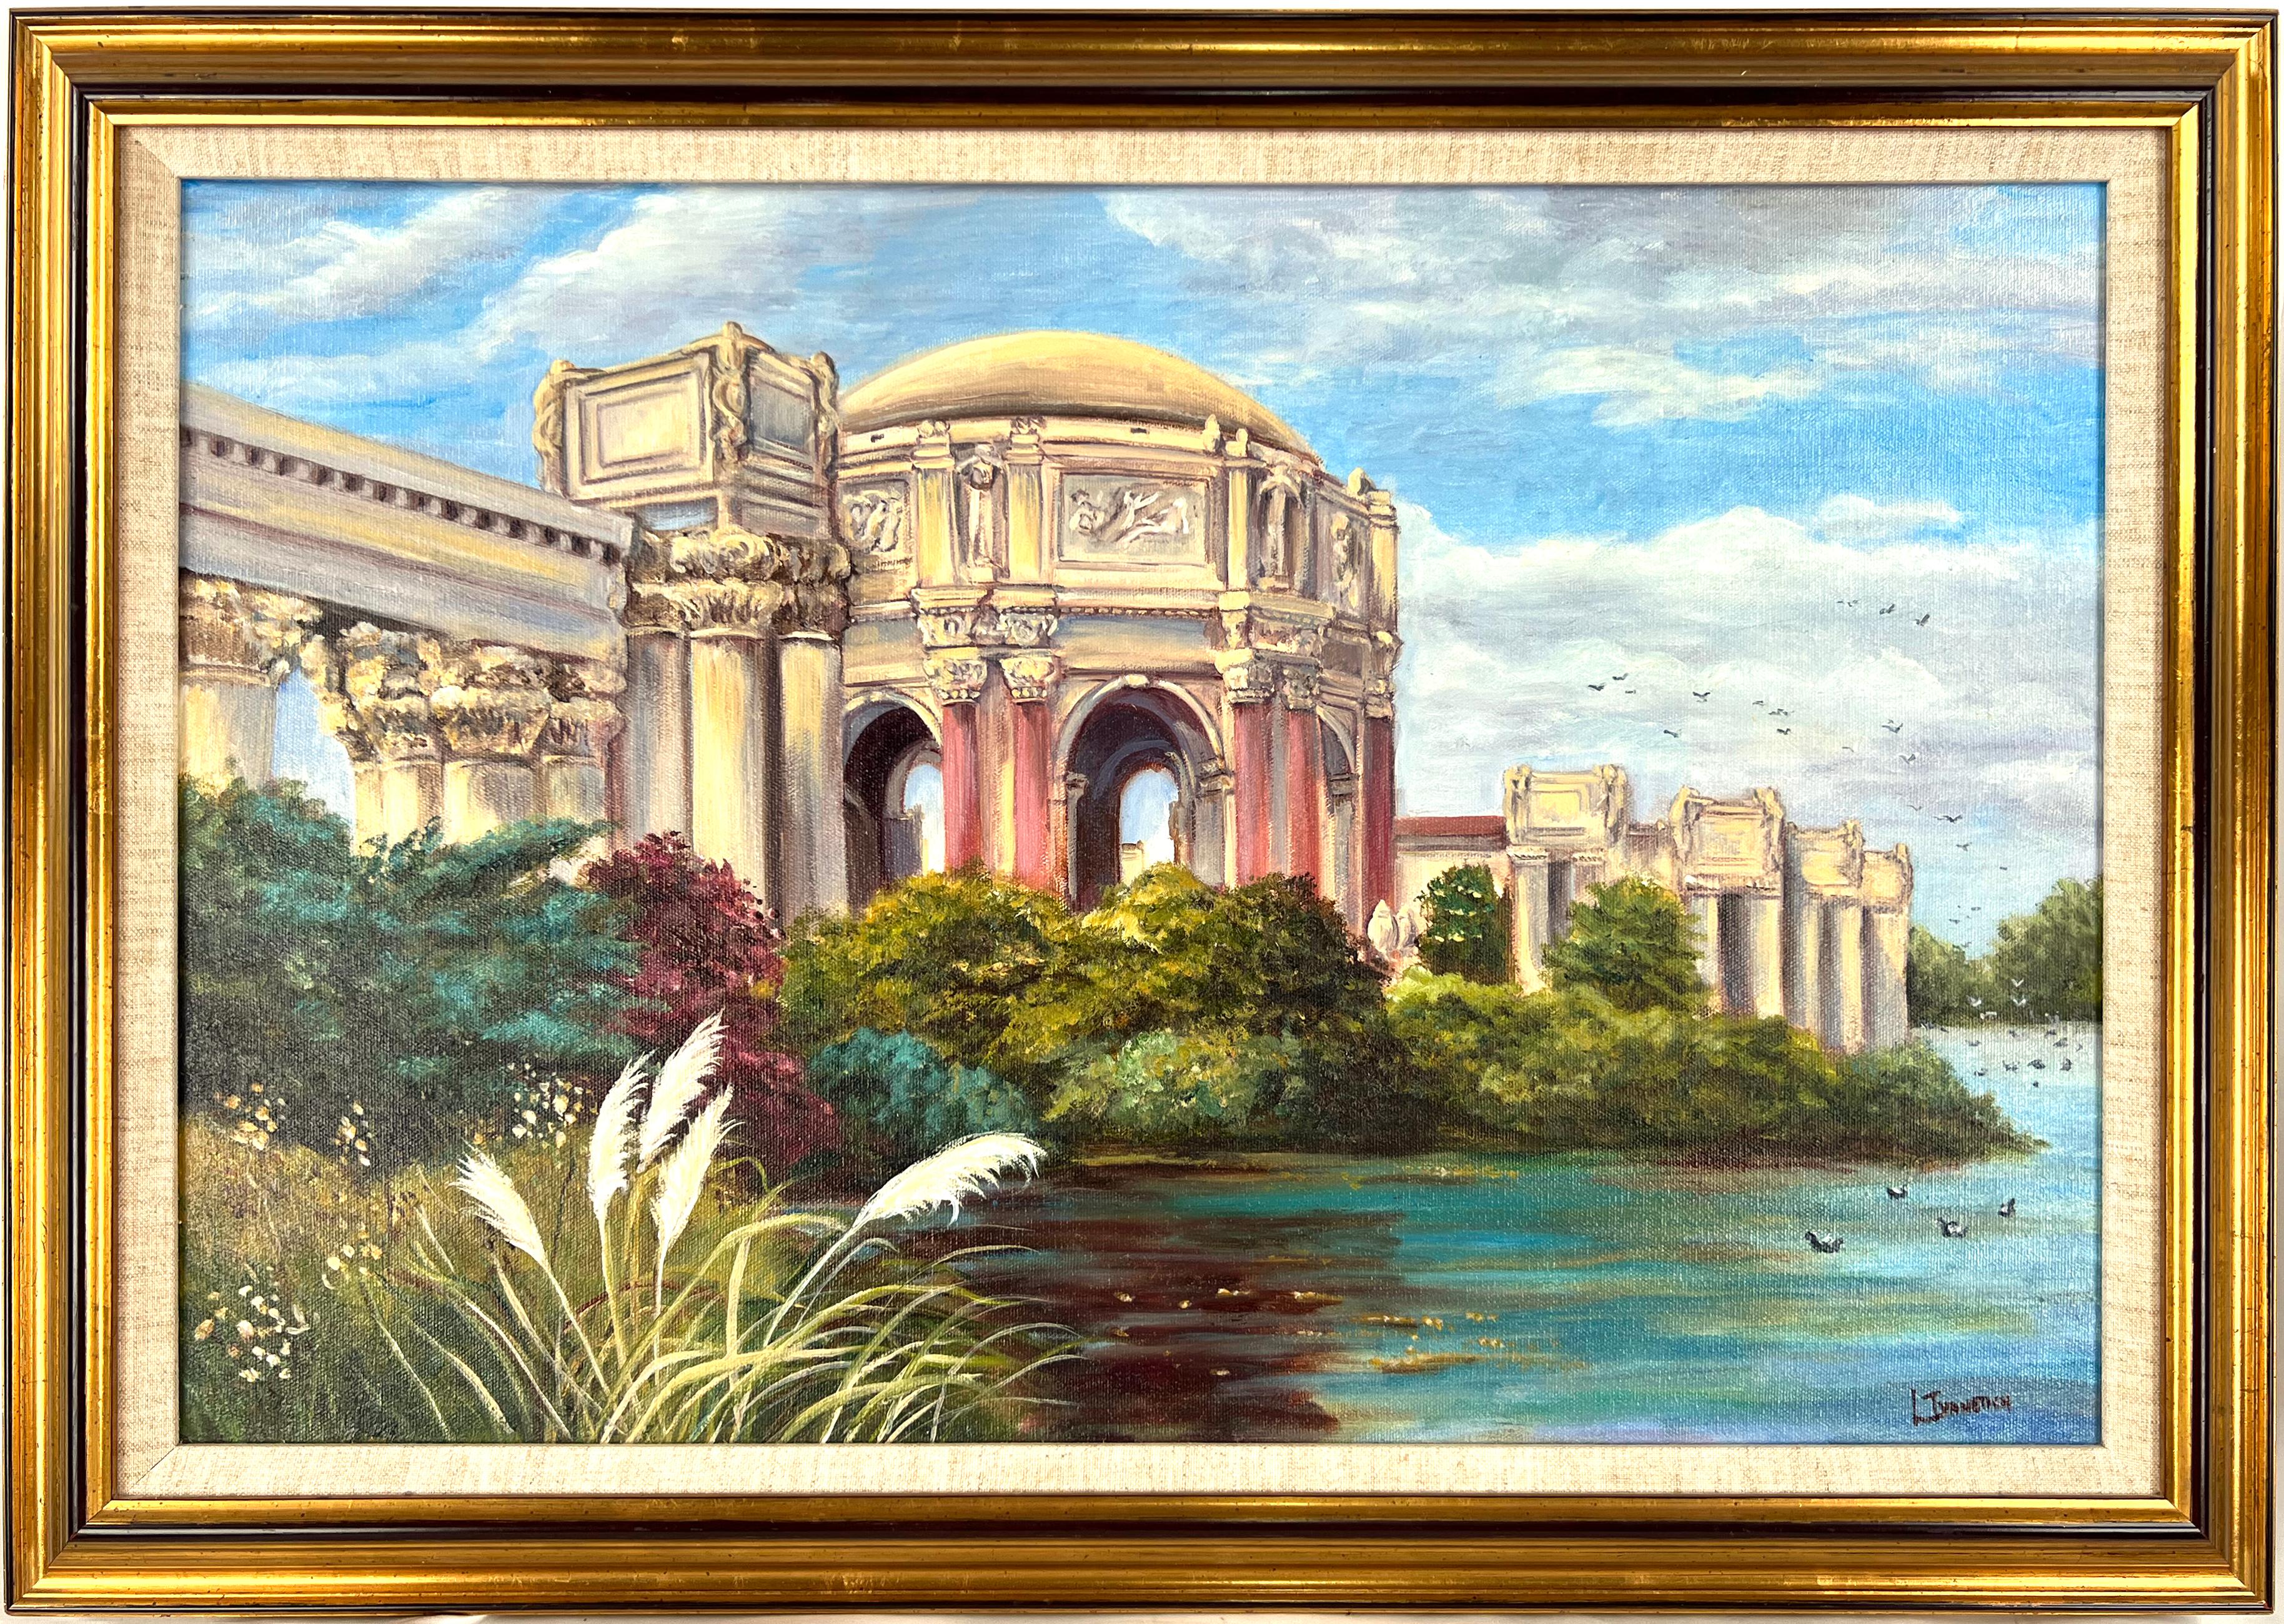 Leonida Ivanetich Landscape Painting - San Francisco Palace of Fine Arts Oil on Canvas